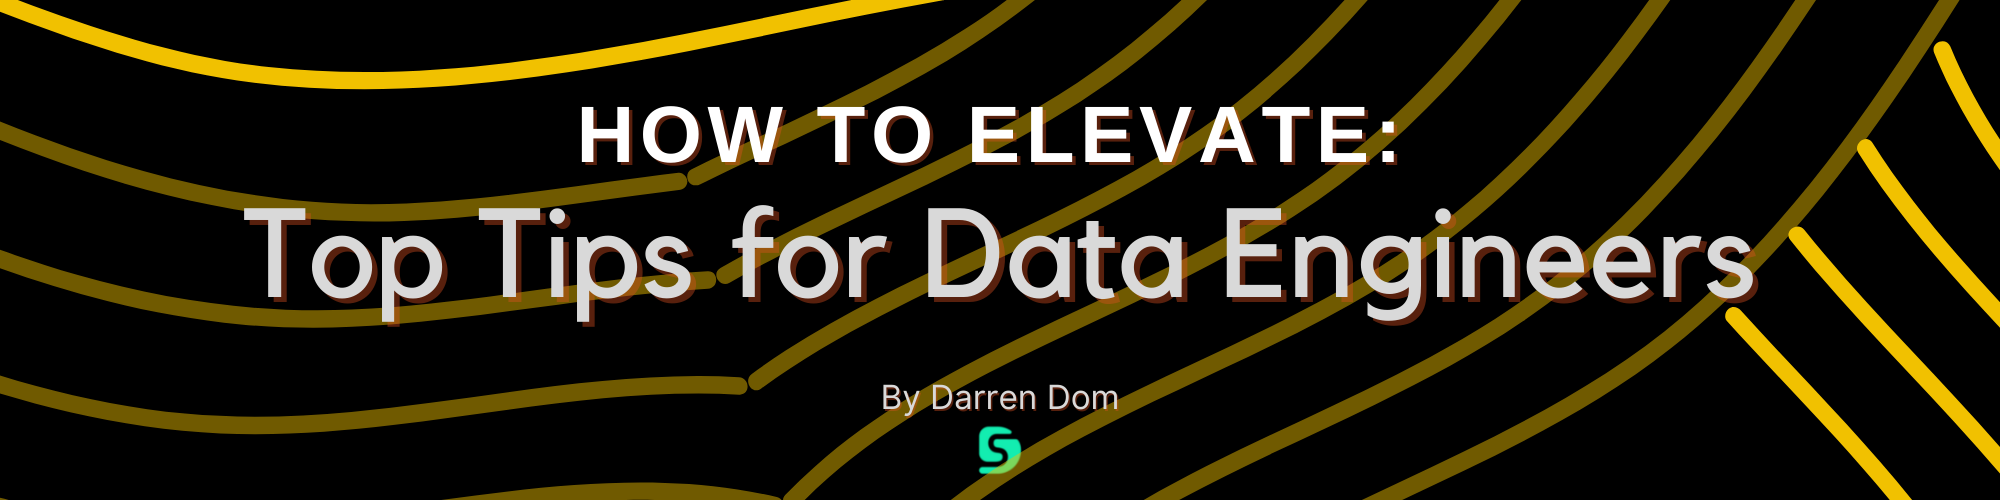 How To Elevate: Top Tips for Data Engineers 